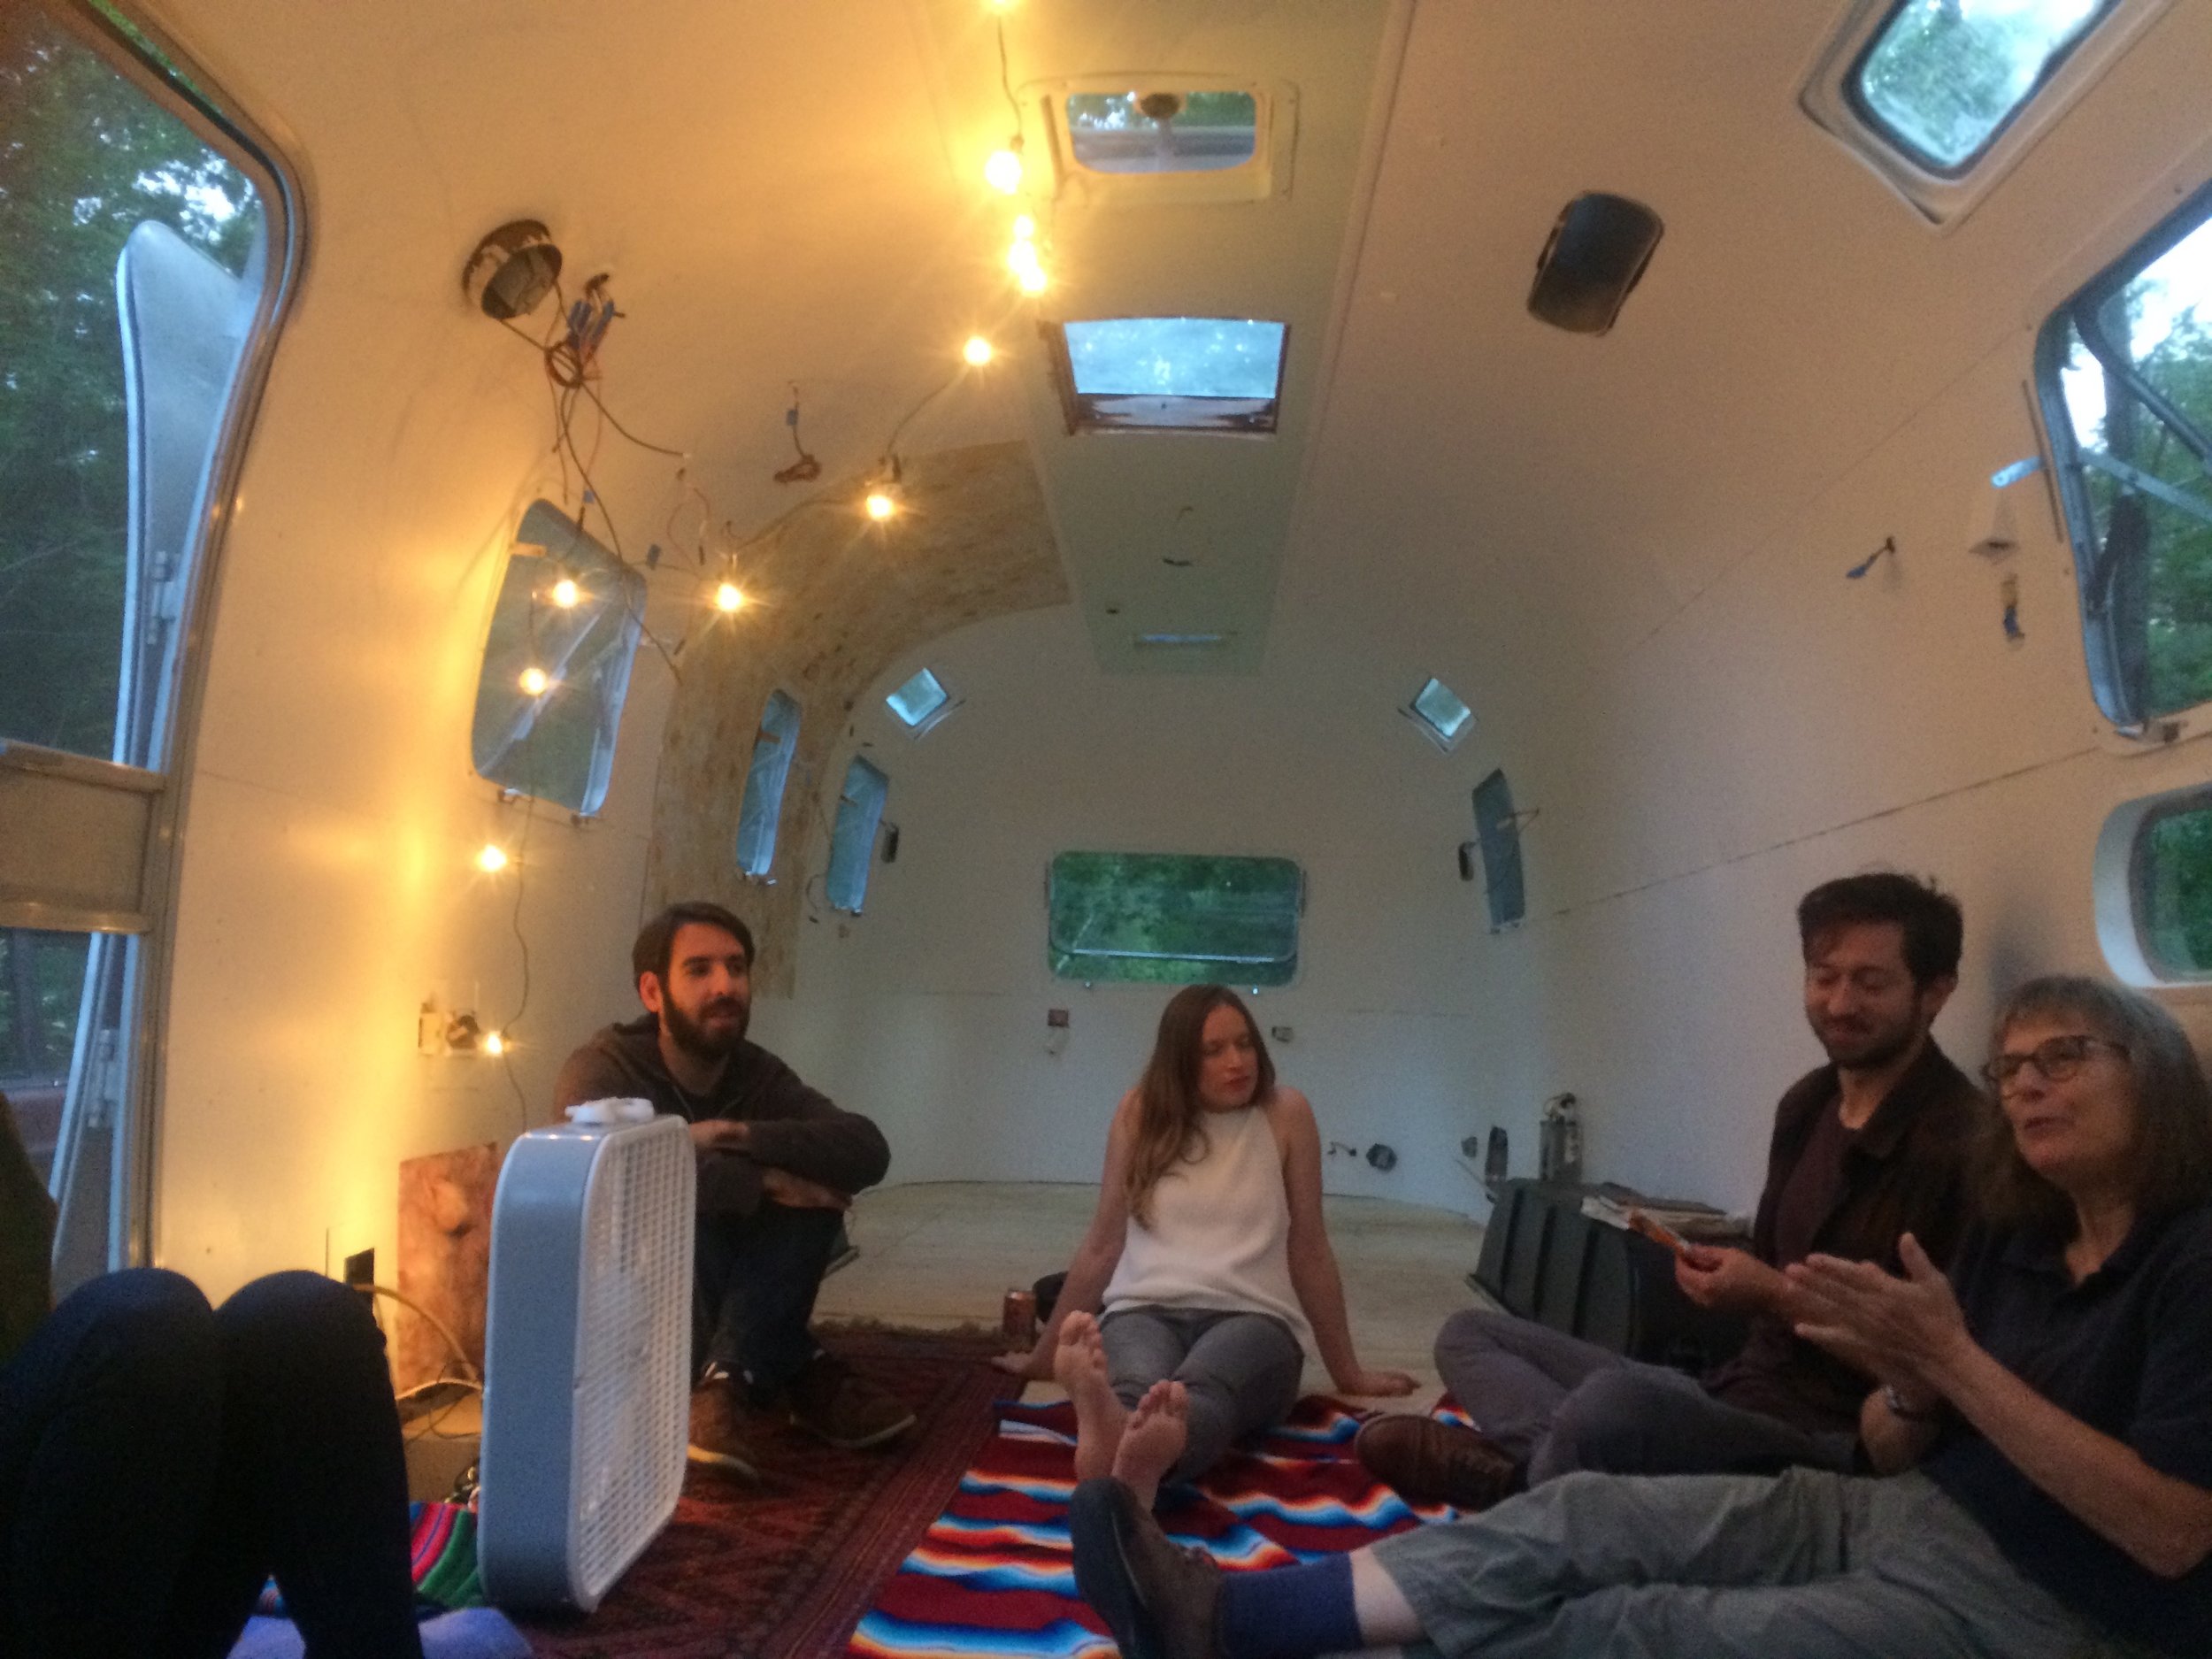  First Portland Radio Club meeting in the unfinished, but floored, Airstream! 